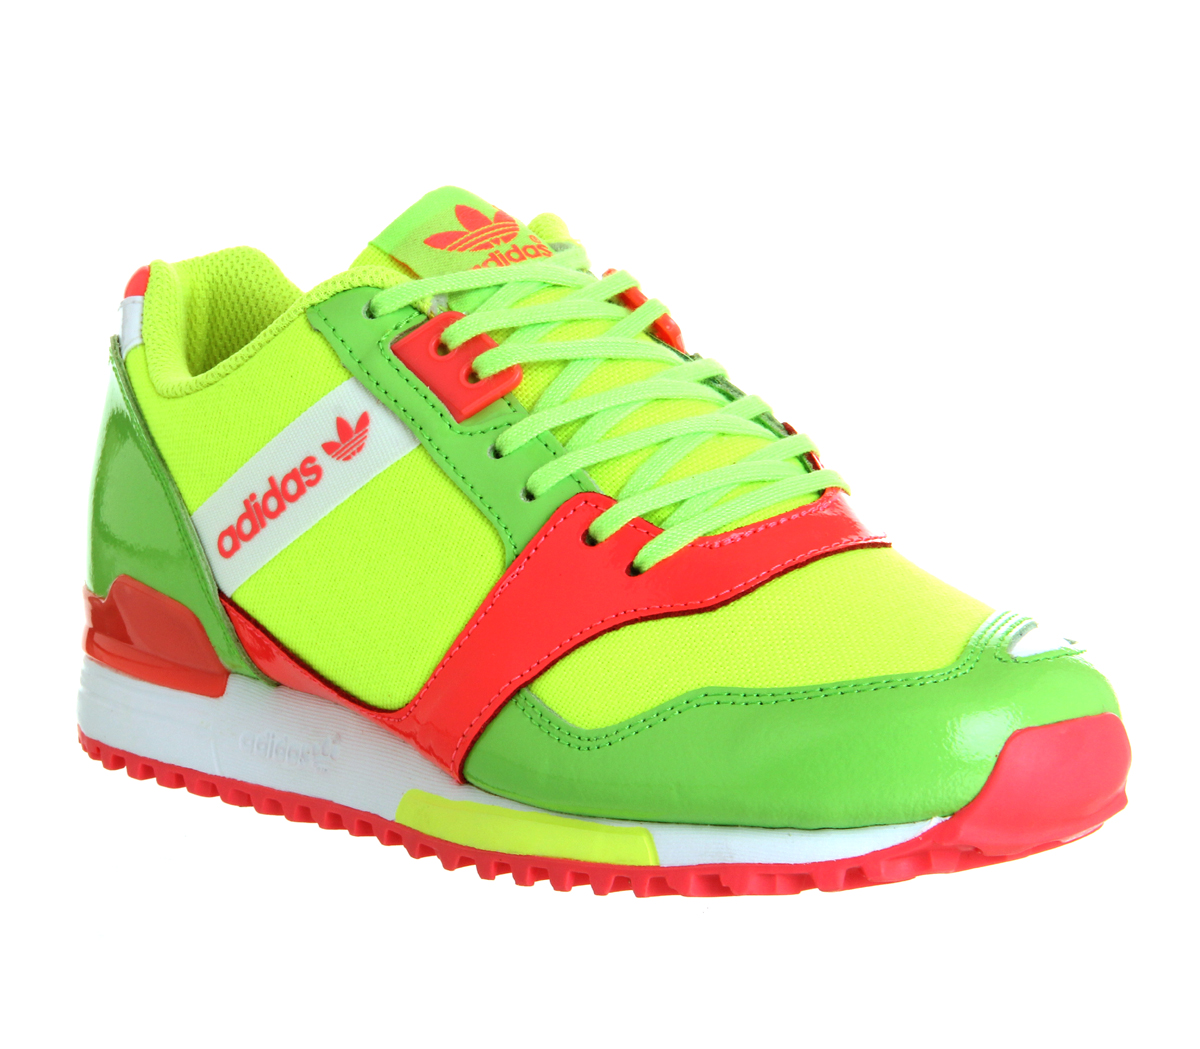 adidasZx700 ContemptElectricity Red Zest